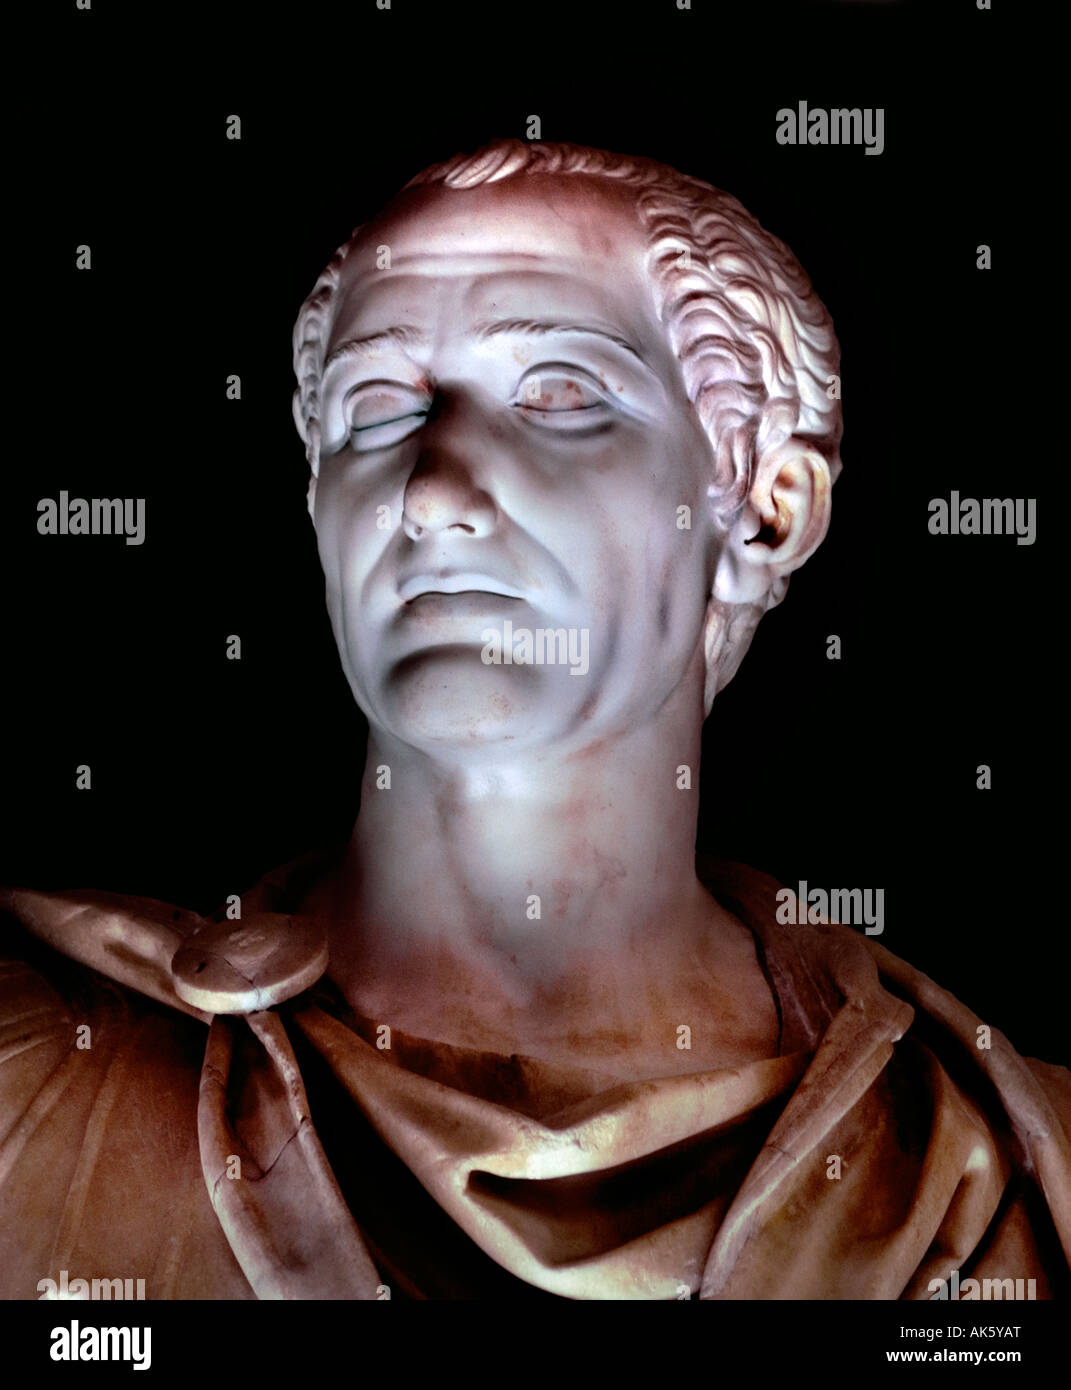 Gaius Julius Caesar 100 BC 44 BC Roman Emperor military political leader and one of the most influential men in world history Stock Photo